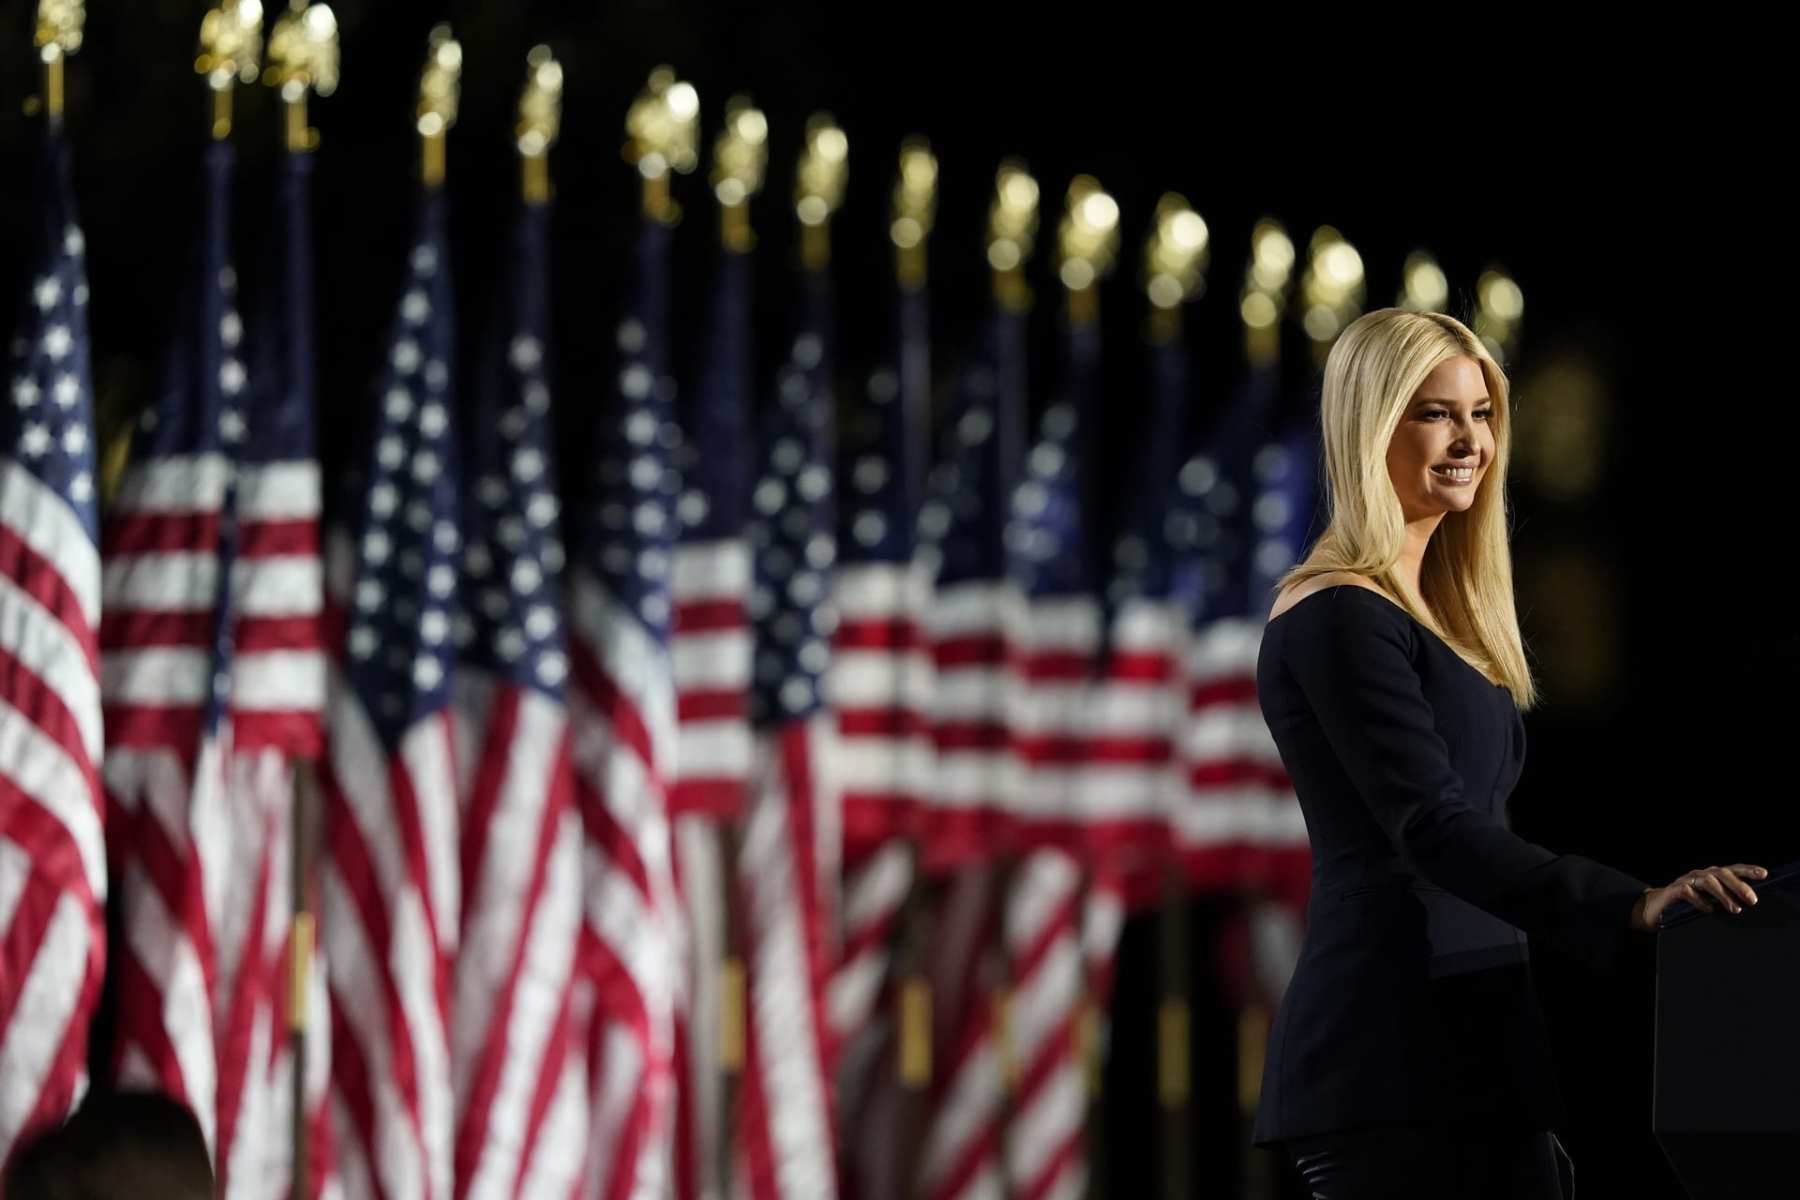 Ivanka Trump giving a speech in front of a row of American flags.